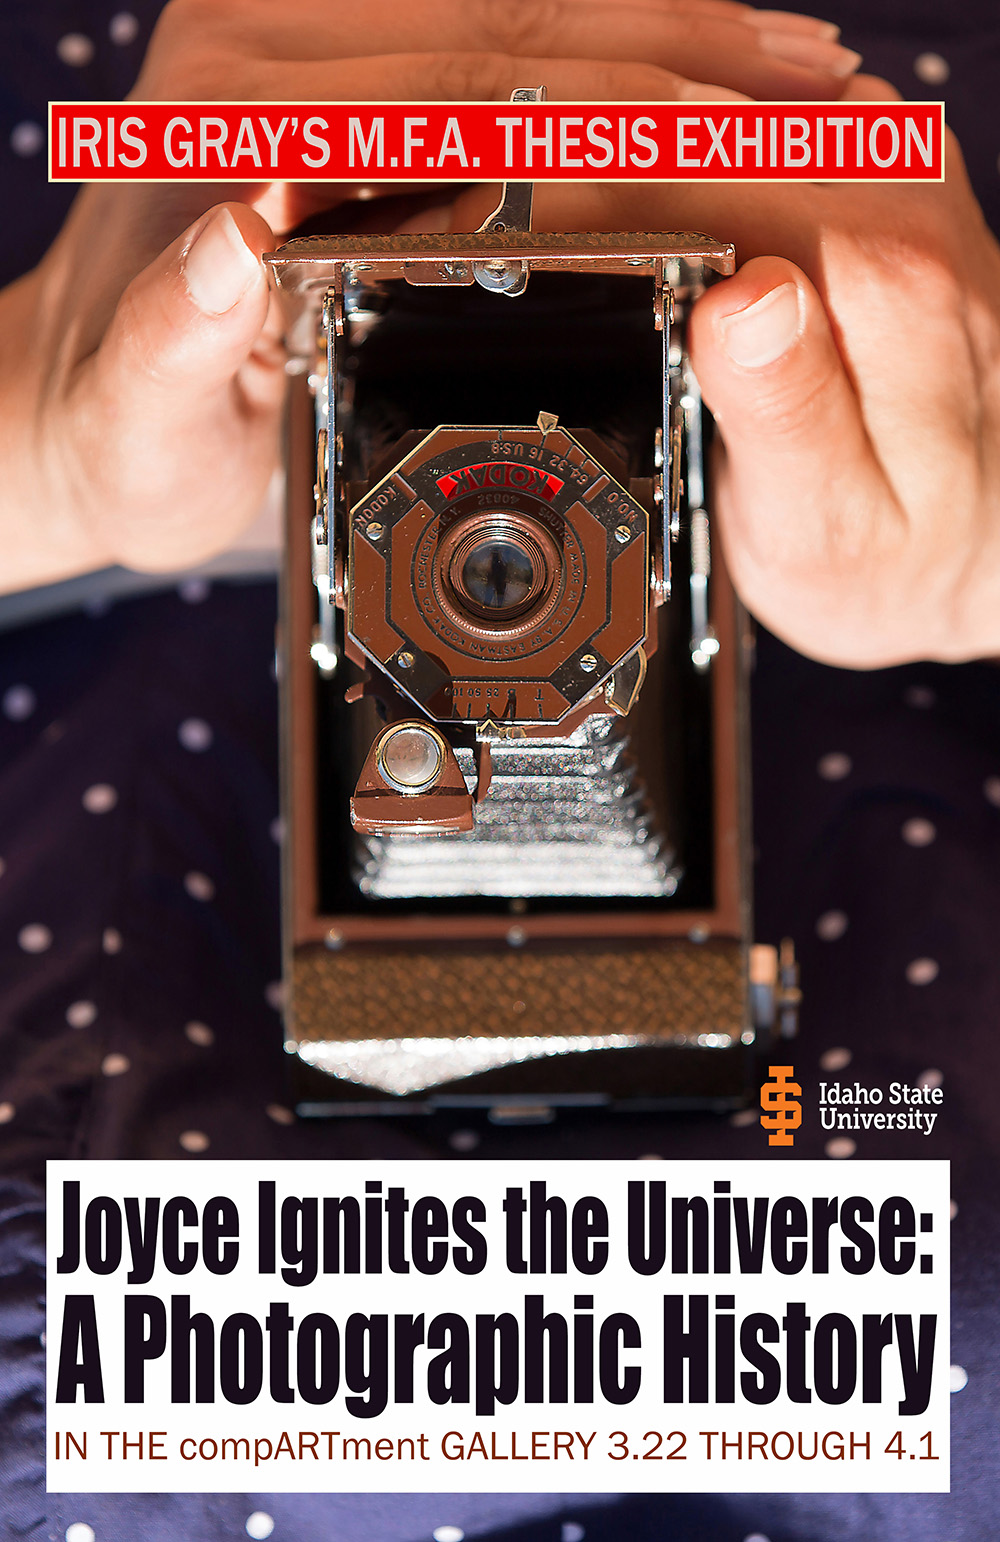 from Joyce Ignites the Universe: A Photographic History - Iris Gray's M.F.A. Thesis Installation